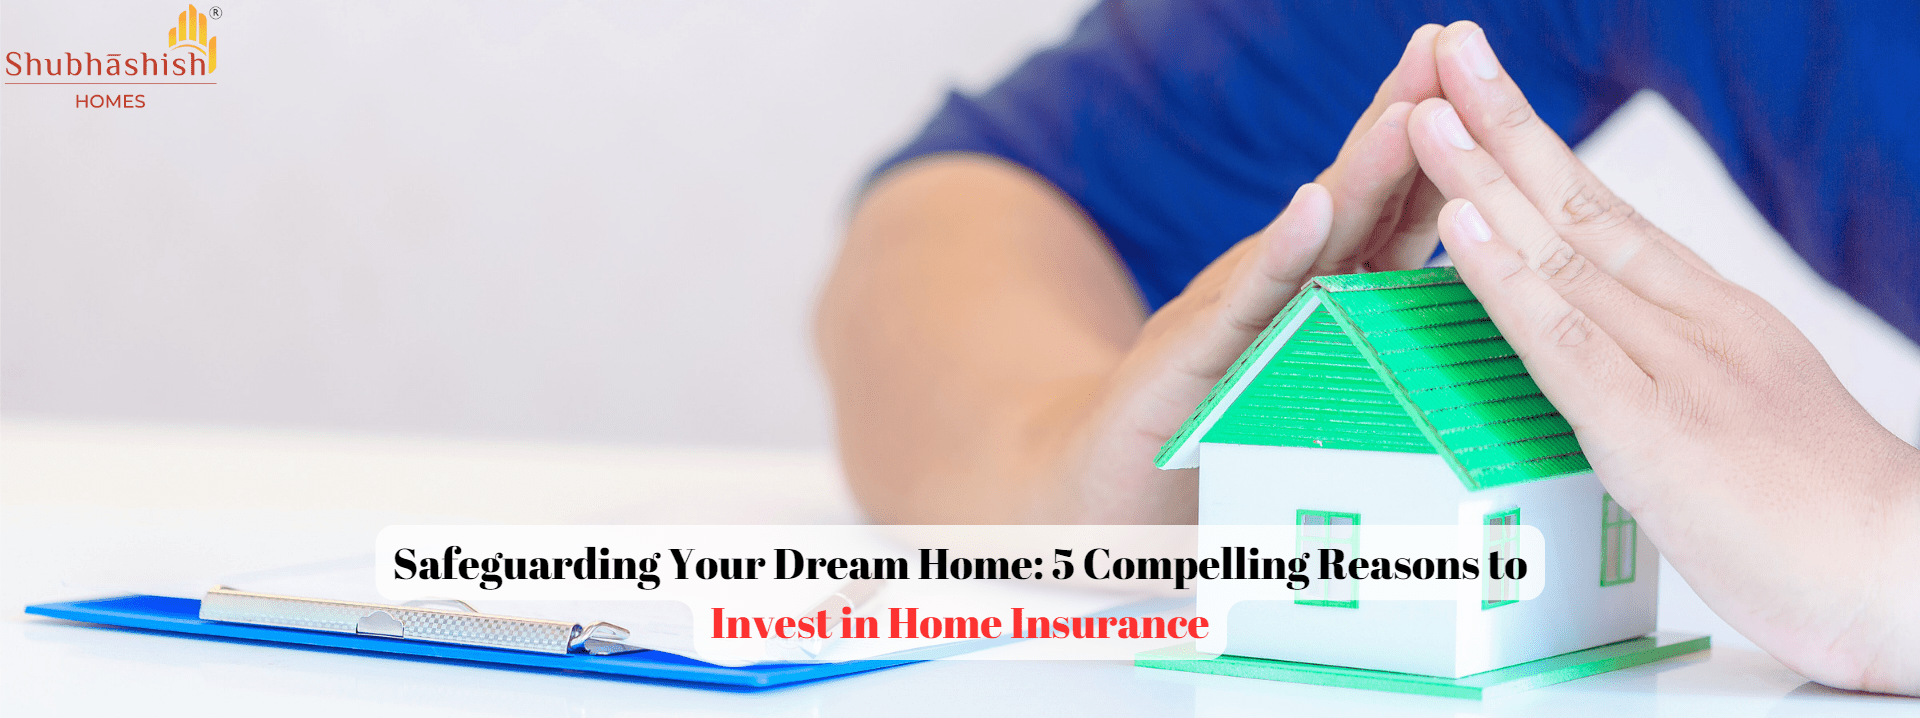 Safeguarding Your Dream Home: 5 Compelling Reasons to Invest in Home Insurance